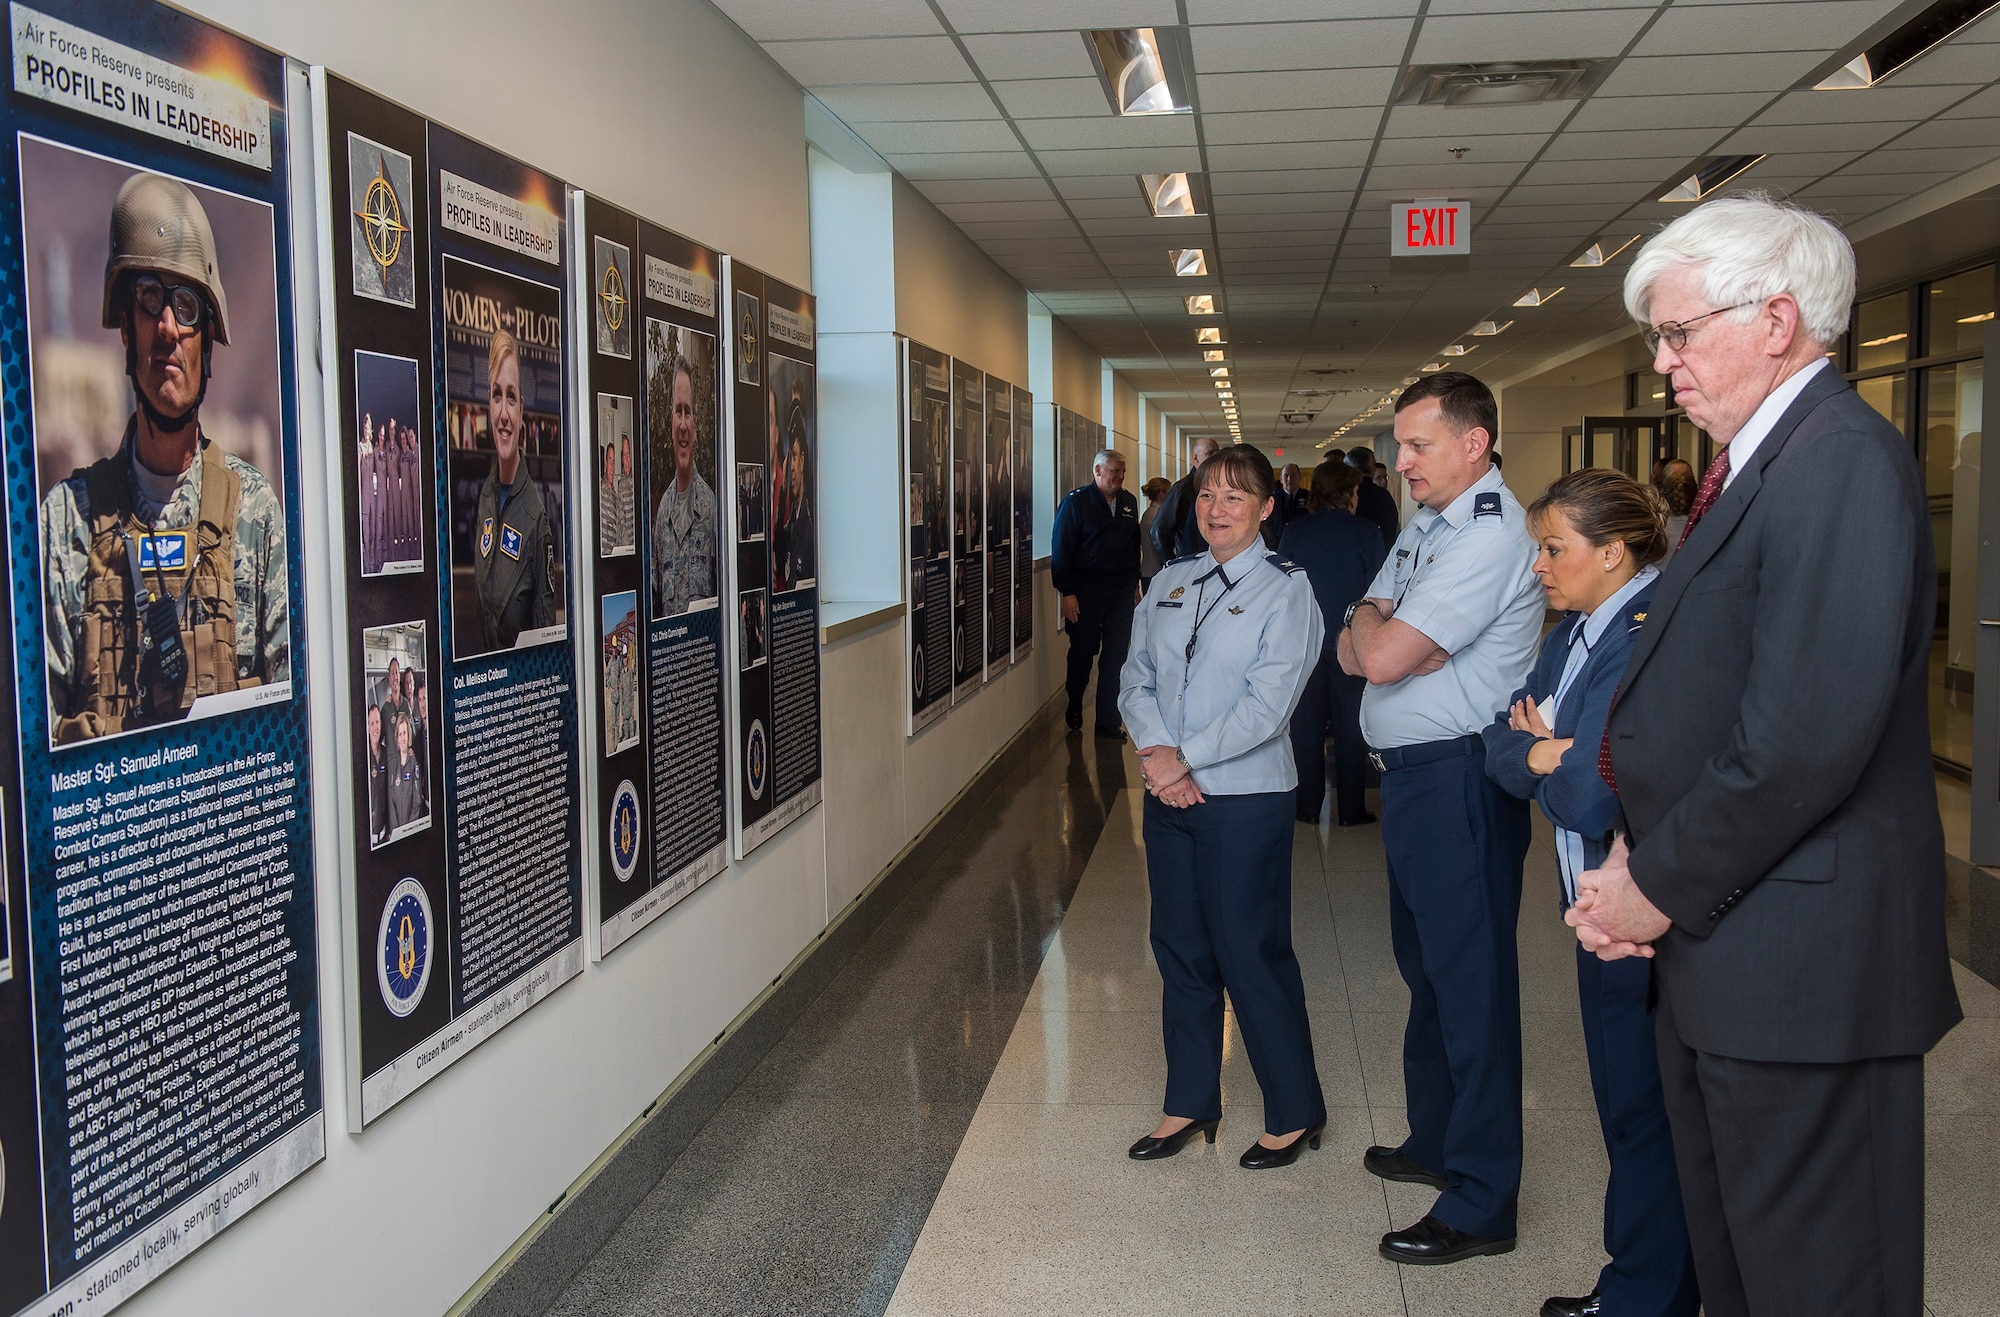 Members of the Air Force Reserve community look over the panels after the unveiling of the Profiles in Leadership display in the Pentagon, Washington D.C., Dec. 7, 2015. The display highlights outstanding examples of leadership in the Air Reserve forces, and celebrates and honors Citizen Airmen's contributions in serving the nation. (U.S. Air Force Photo/Jim Varhegyi)